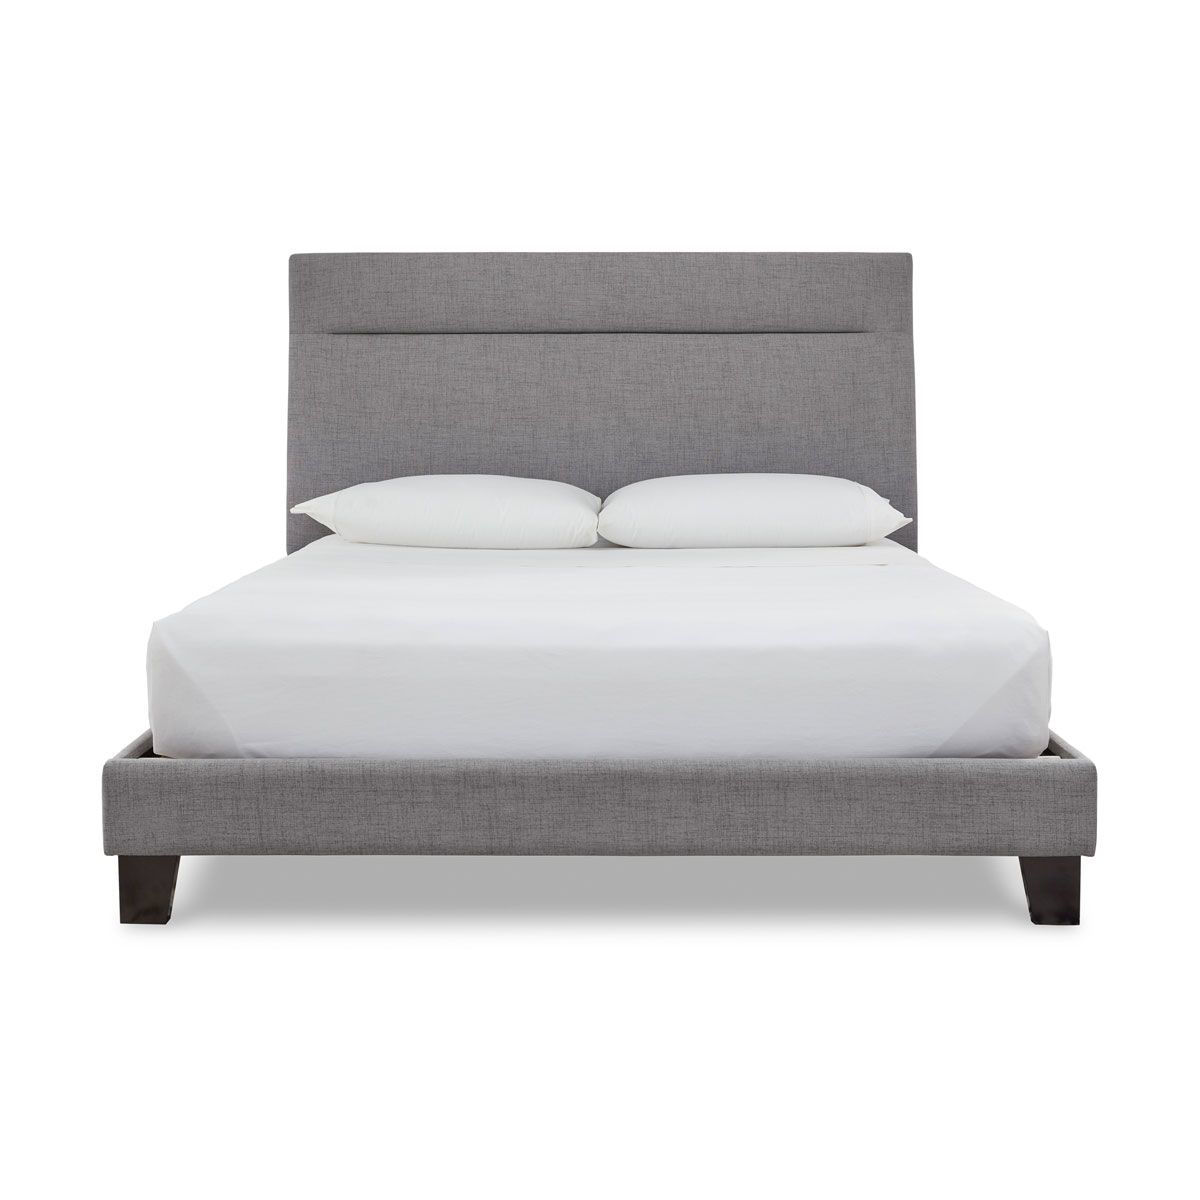 Picture of ESQUIRE QUEEN BED